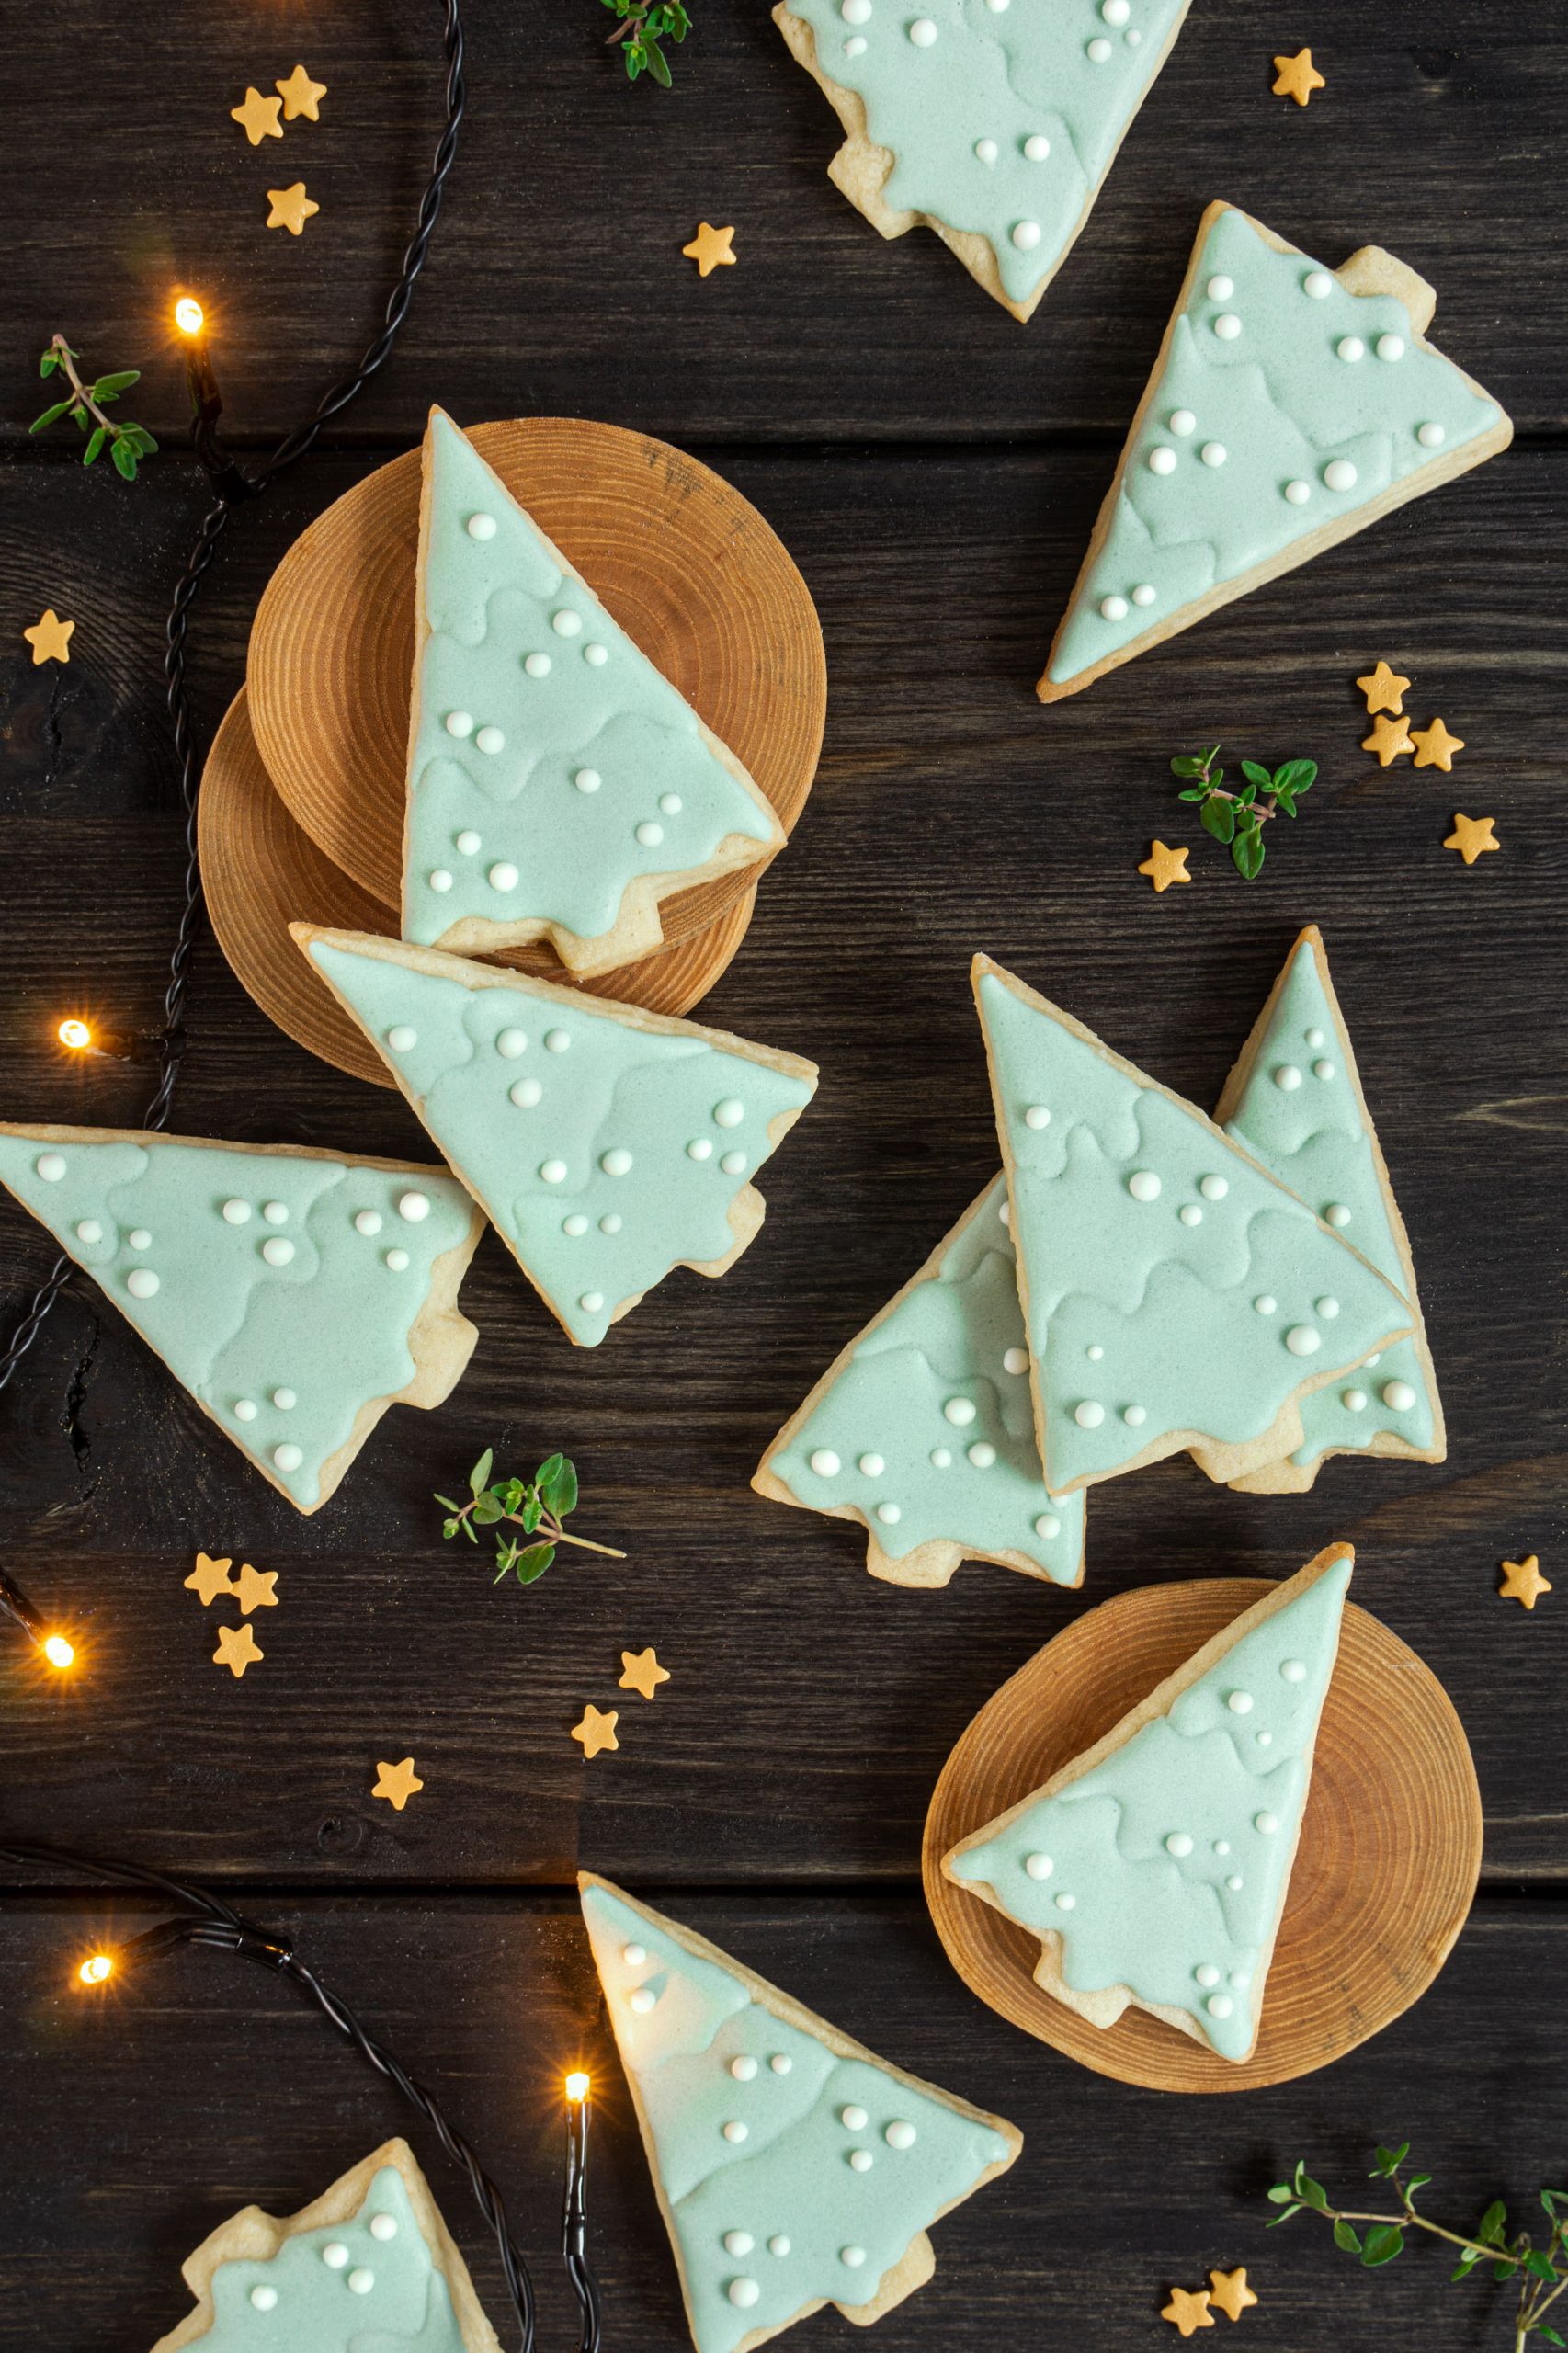 Fir tree shaped sugar cookies, decorated with mint color royal icing